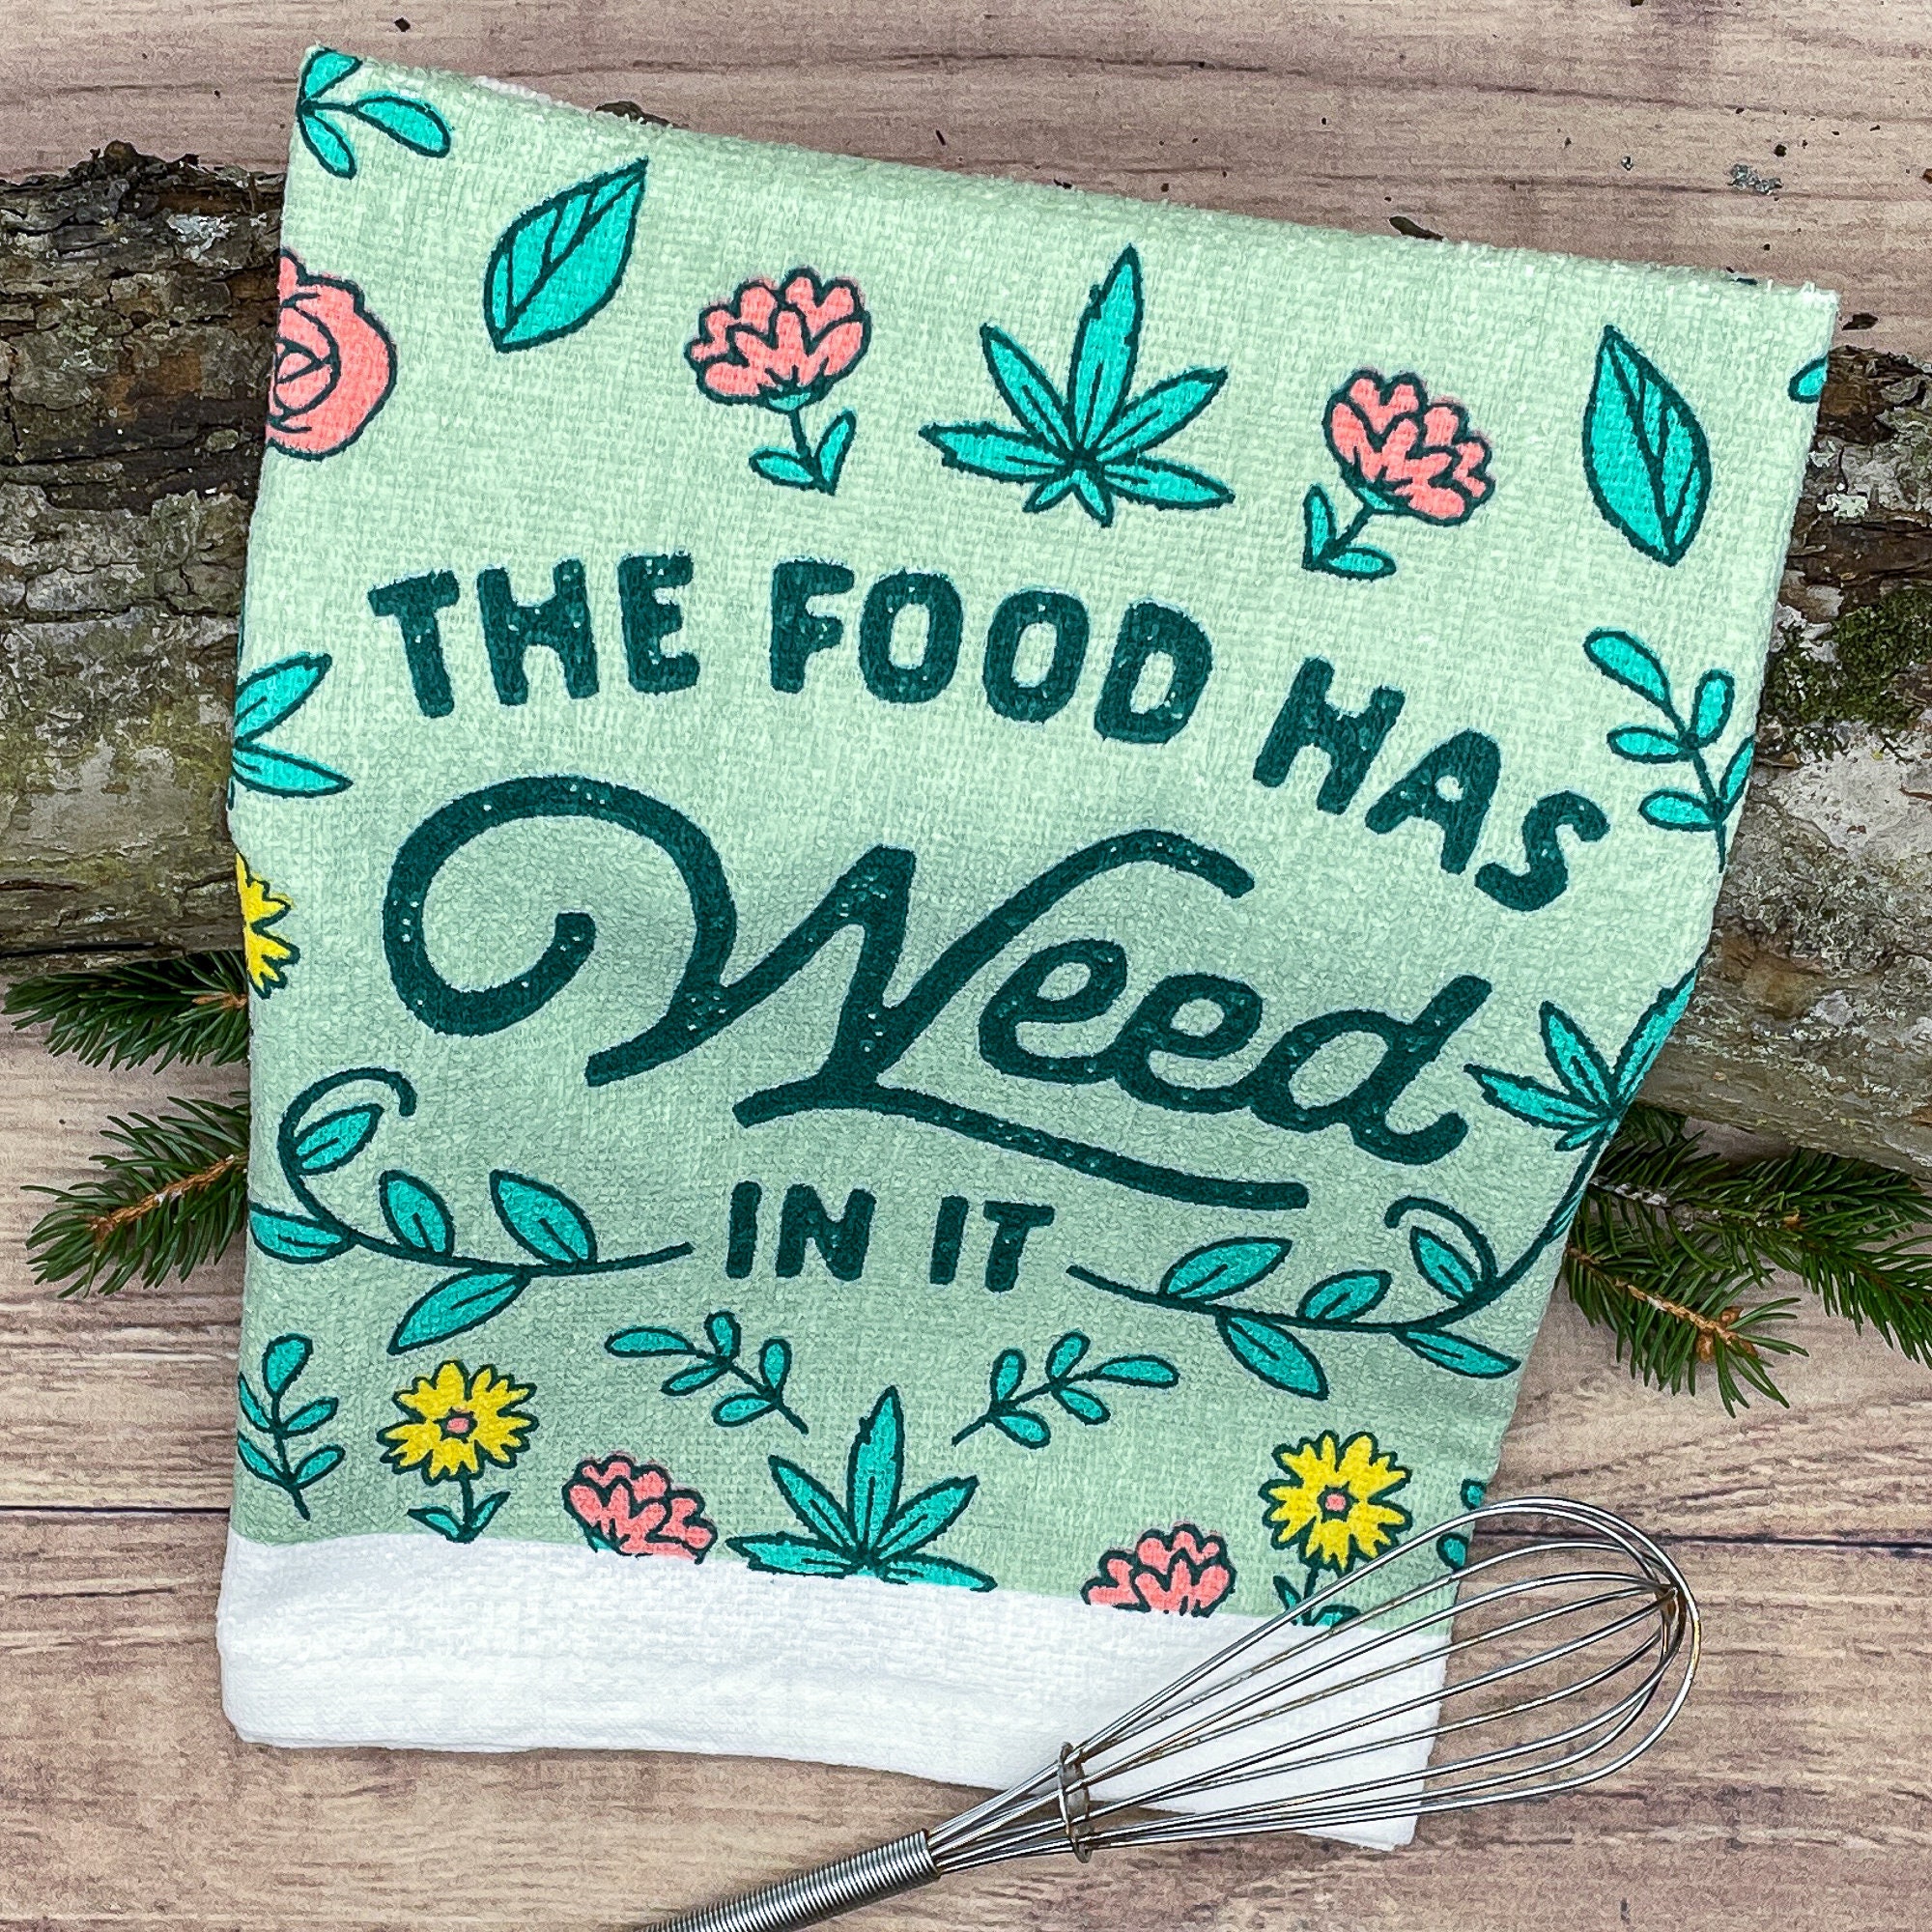 Food Has Weed in It Oven Mitt, Housewarming Gift, Pot Holder, Christmas  Gift, Hostess Gift, Funny Oven Mitts, Weed Gifts, Weed Aprons 